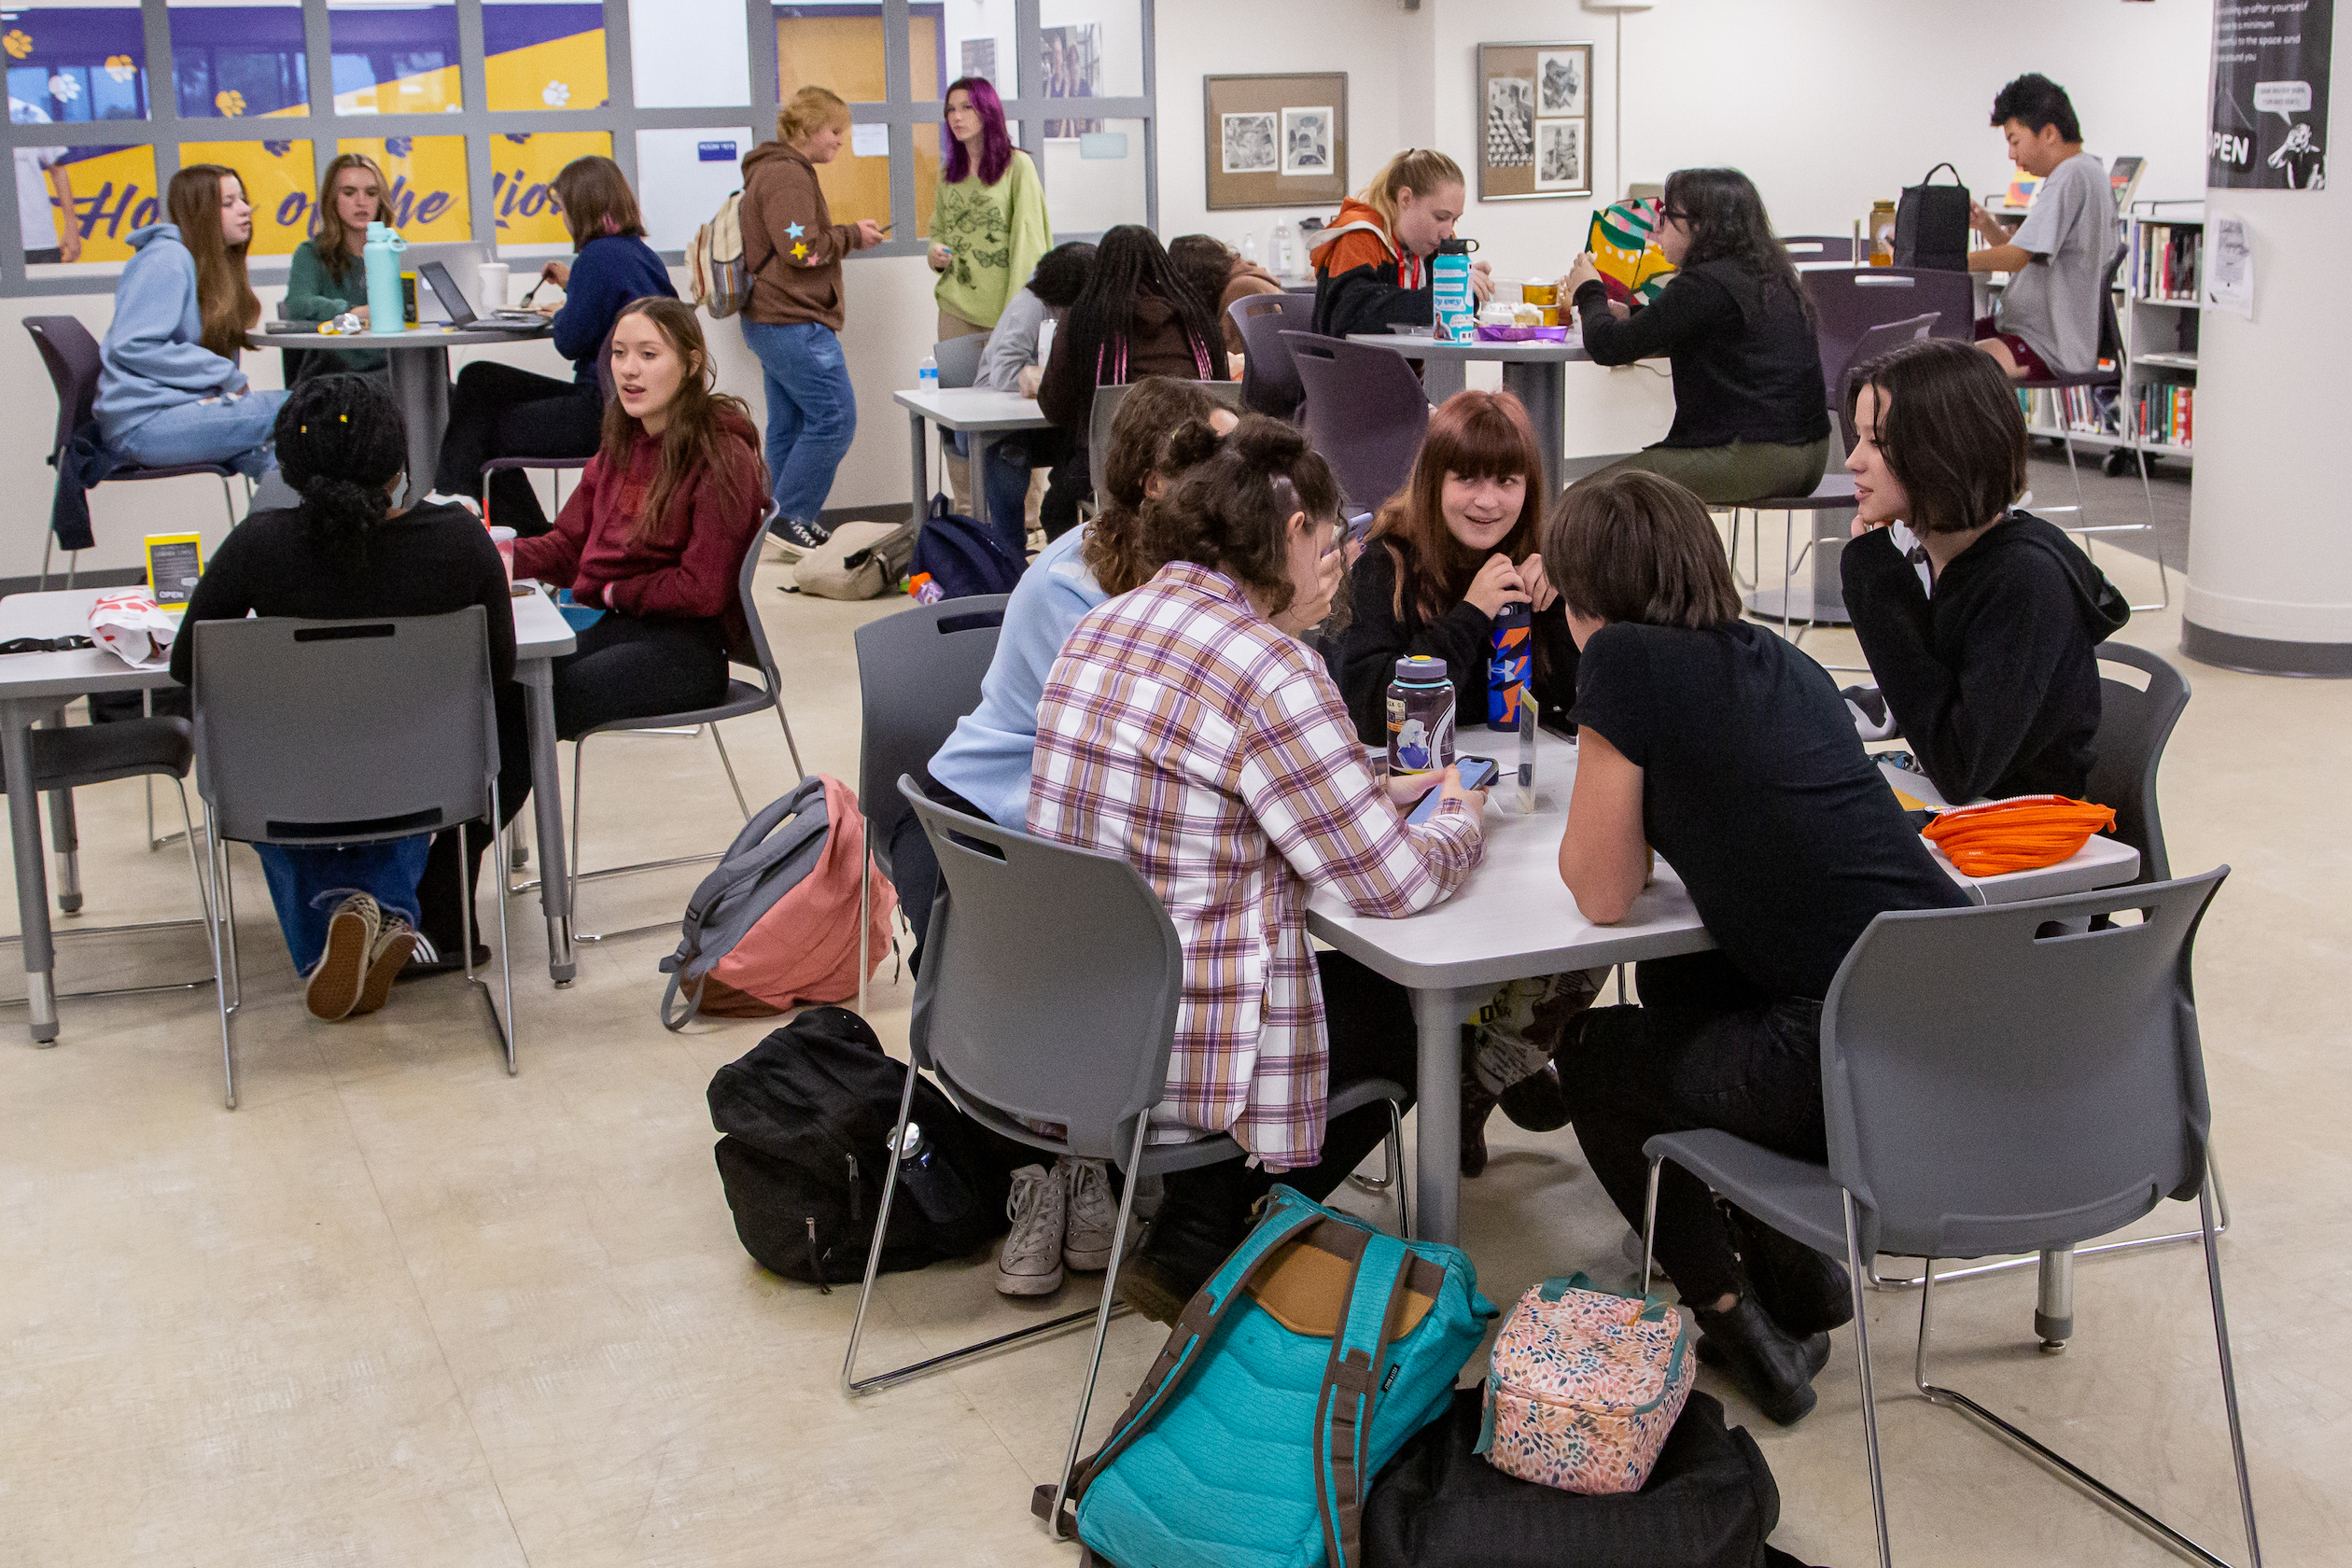 Groups of students gathered in a library common area between classes